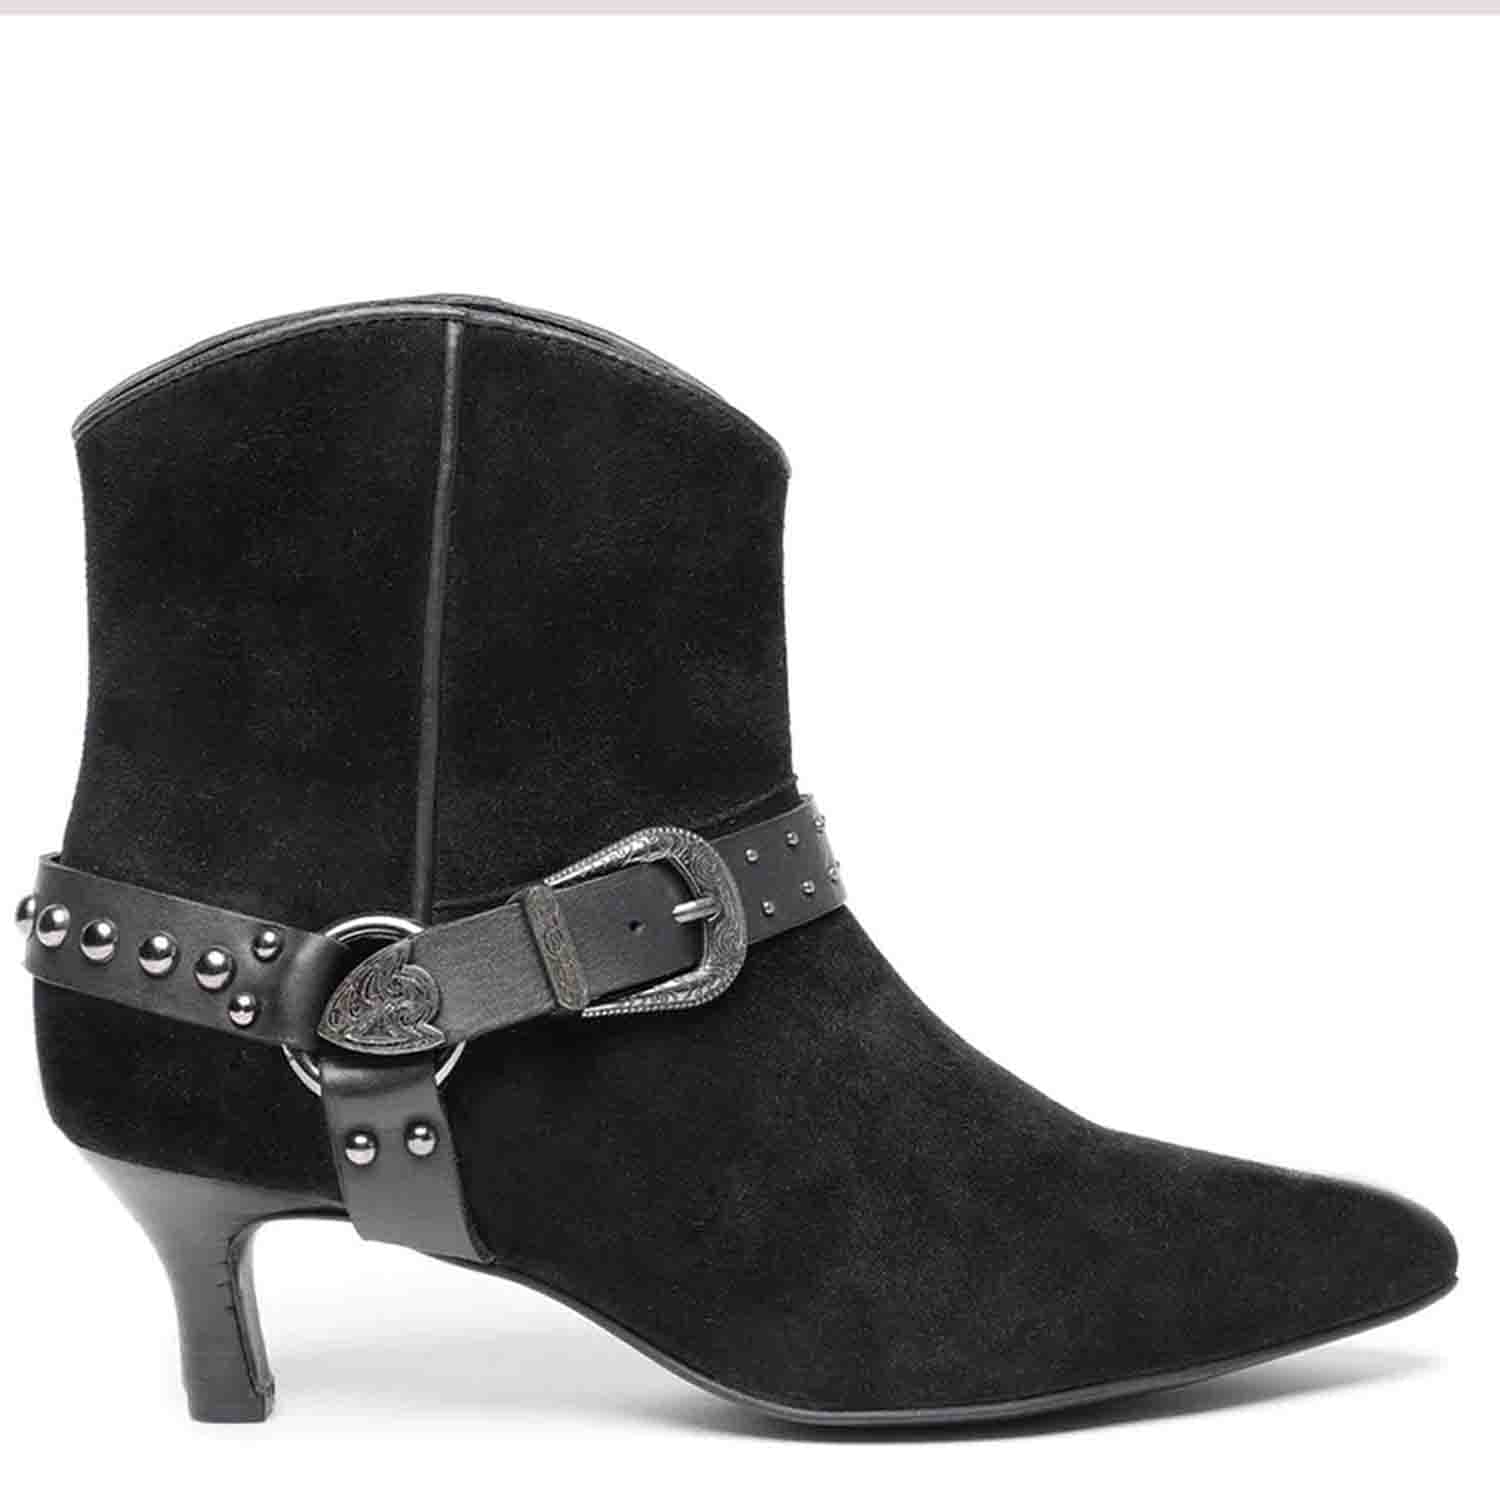 Michael Kors Women's Amal Buckled Studded Ankle Booties | Bloomingdale's